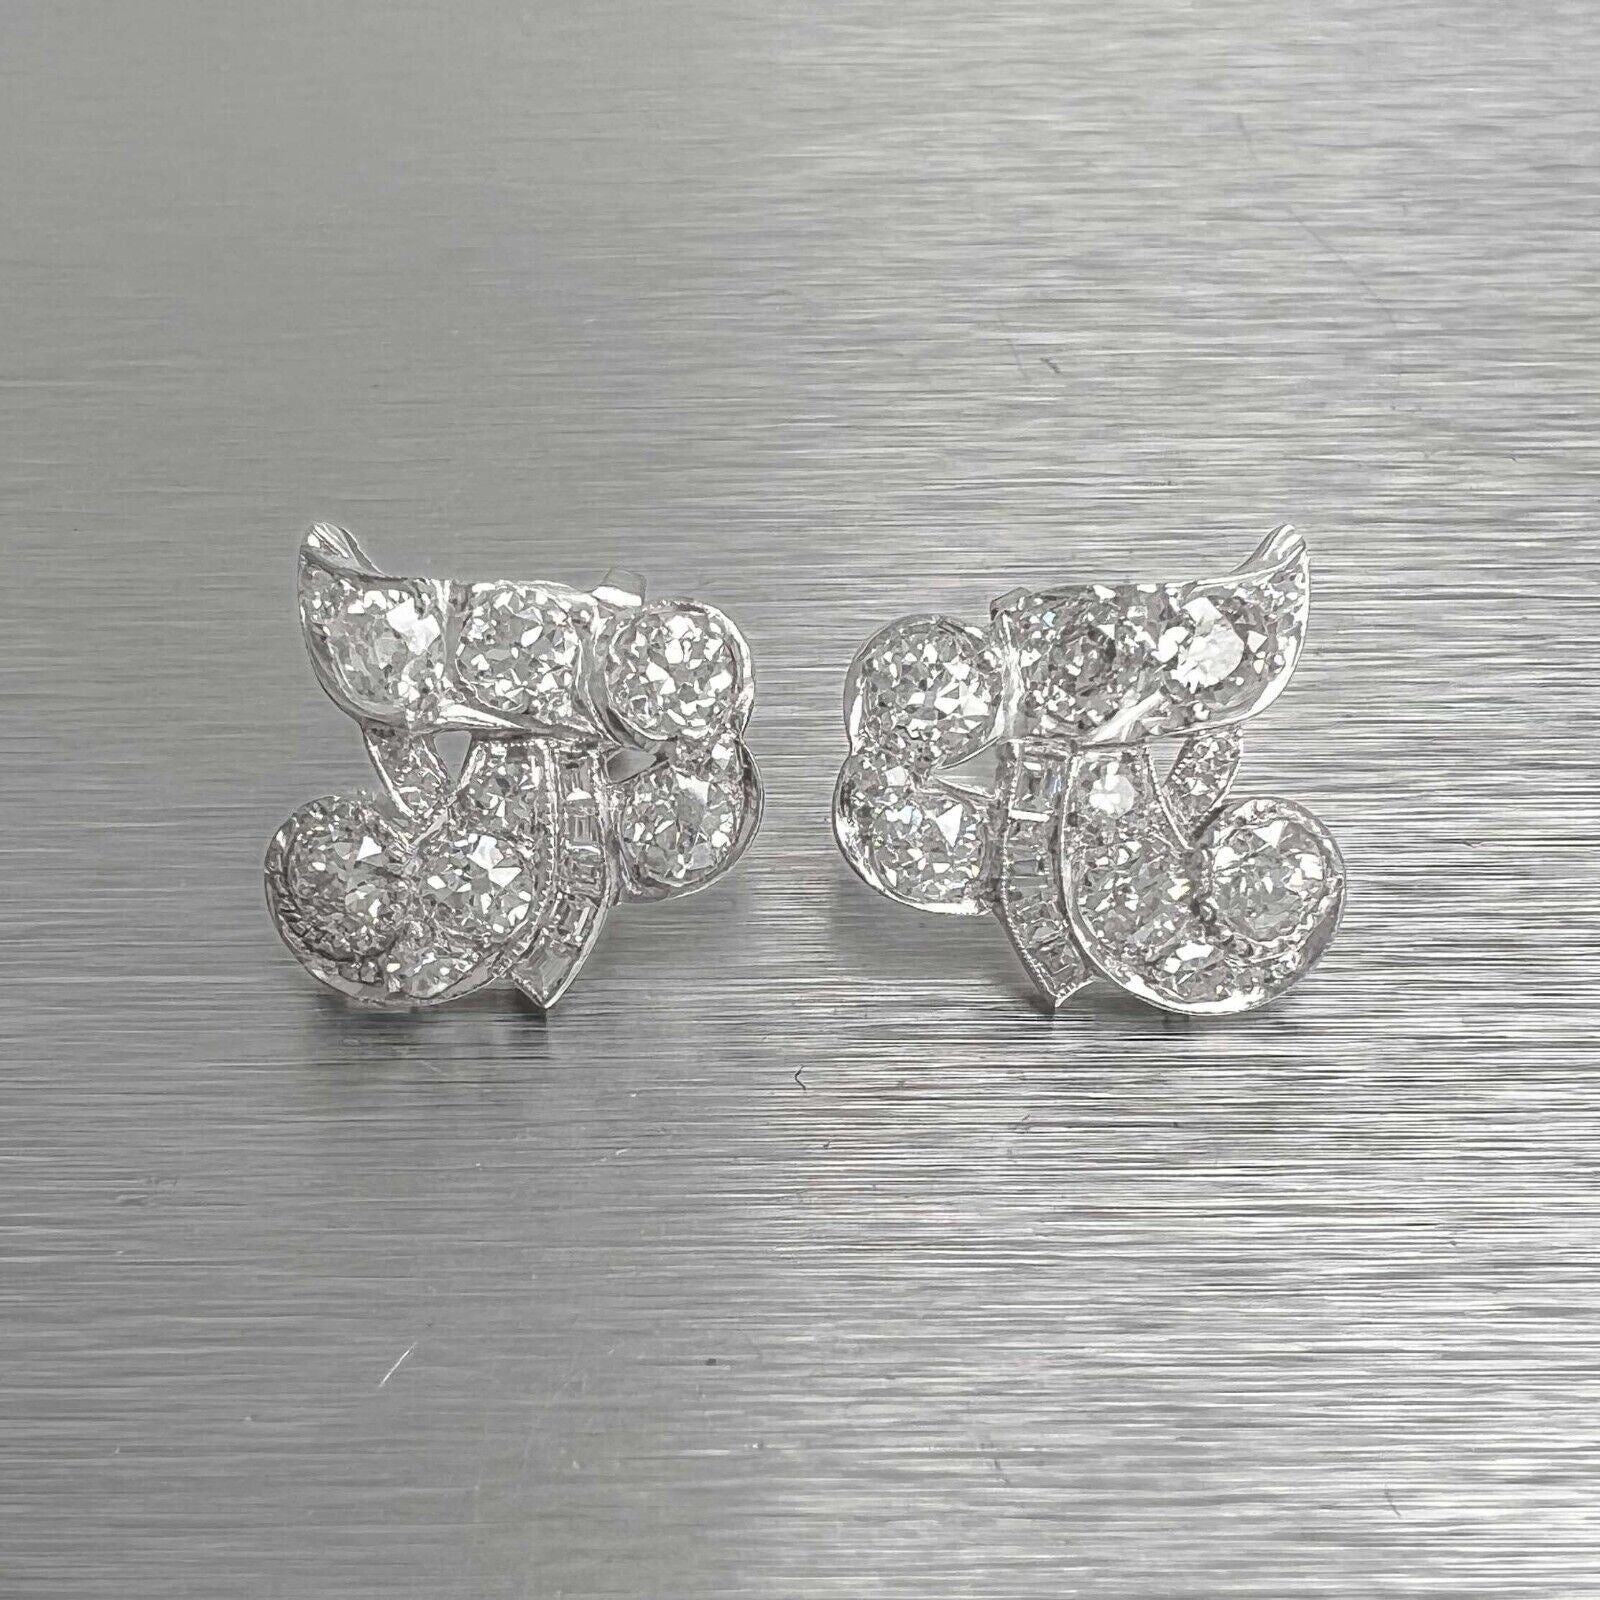 Cartier 1960s Pre-owned 18kt Yellow Gold Diamond Clip Earrings